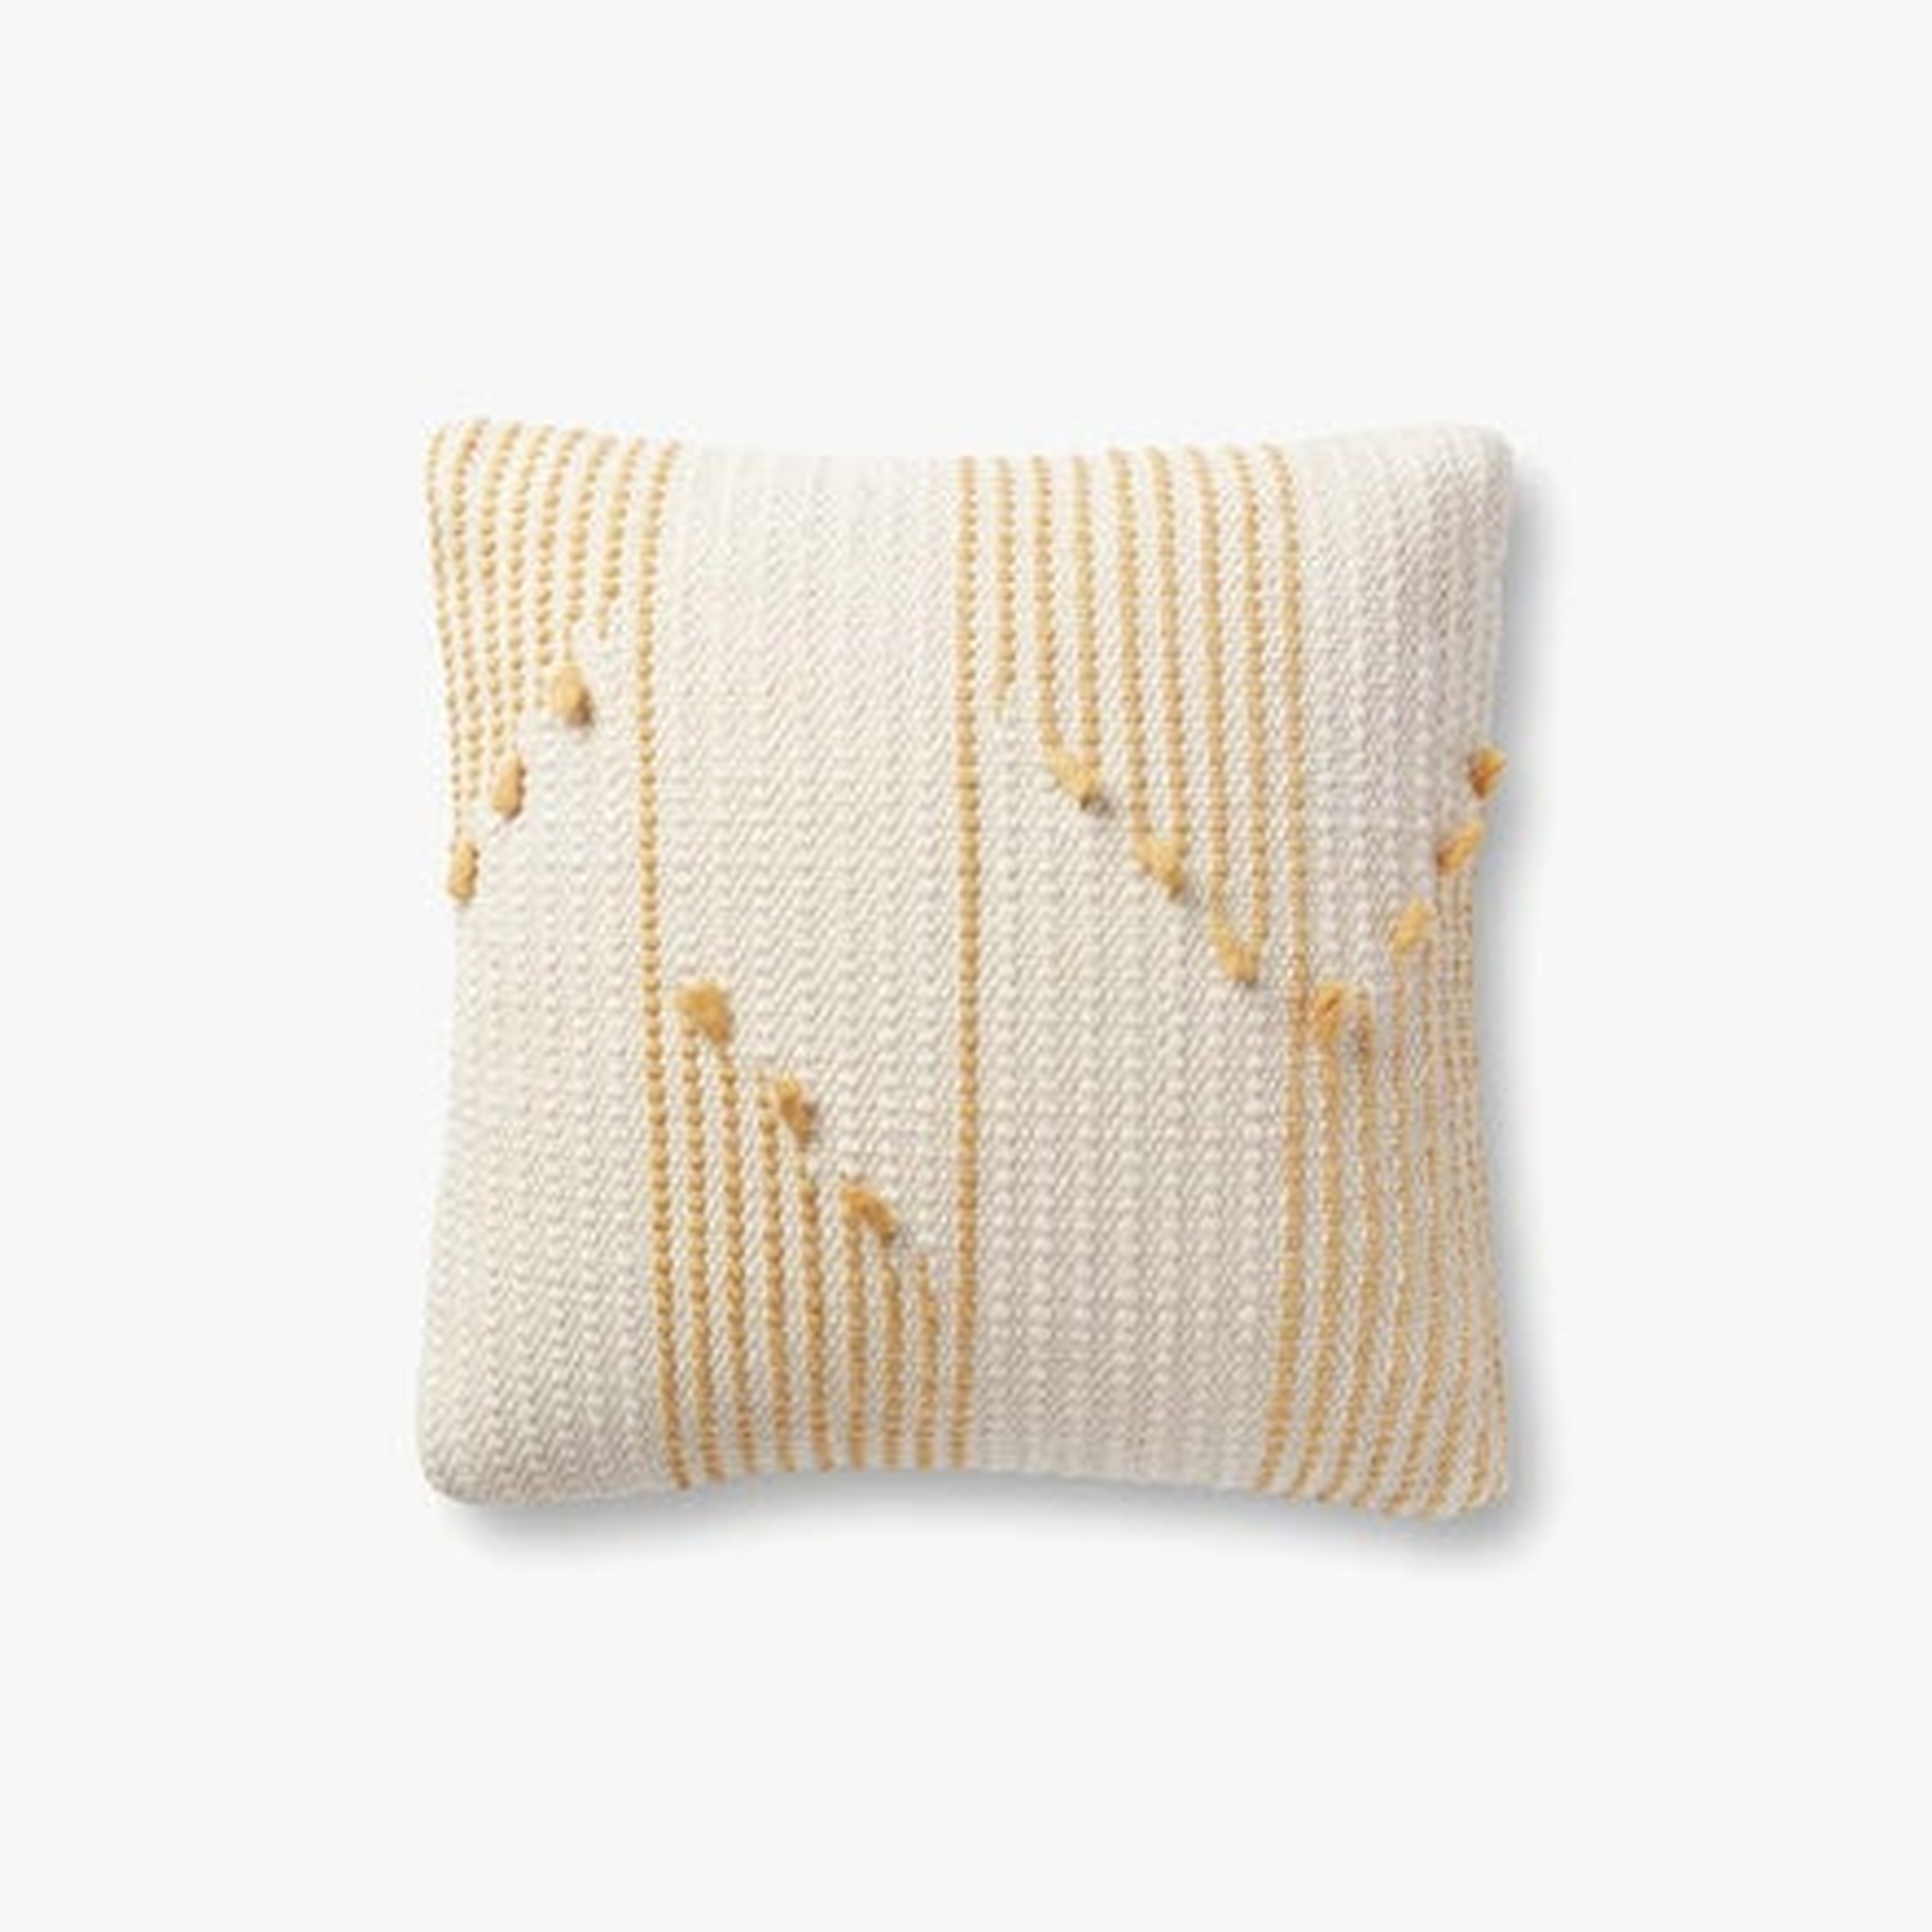 PILLOWS P1156 IVORY / GOLD 18" x 18" Cover w/Down - Magnolia Home by Joana Gaines Crafted by Loloi Rugs